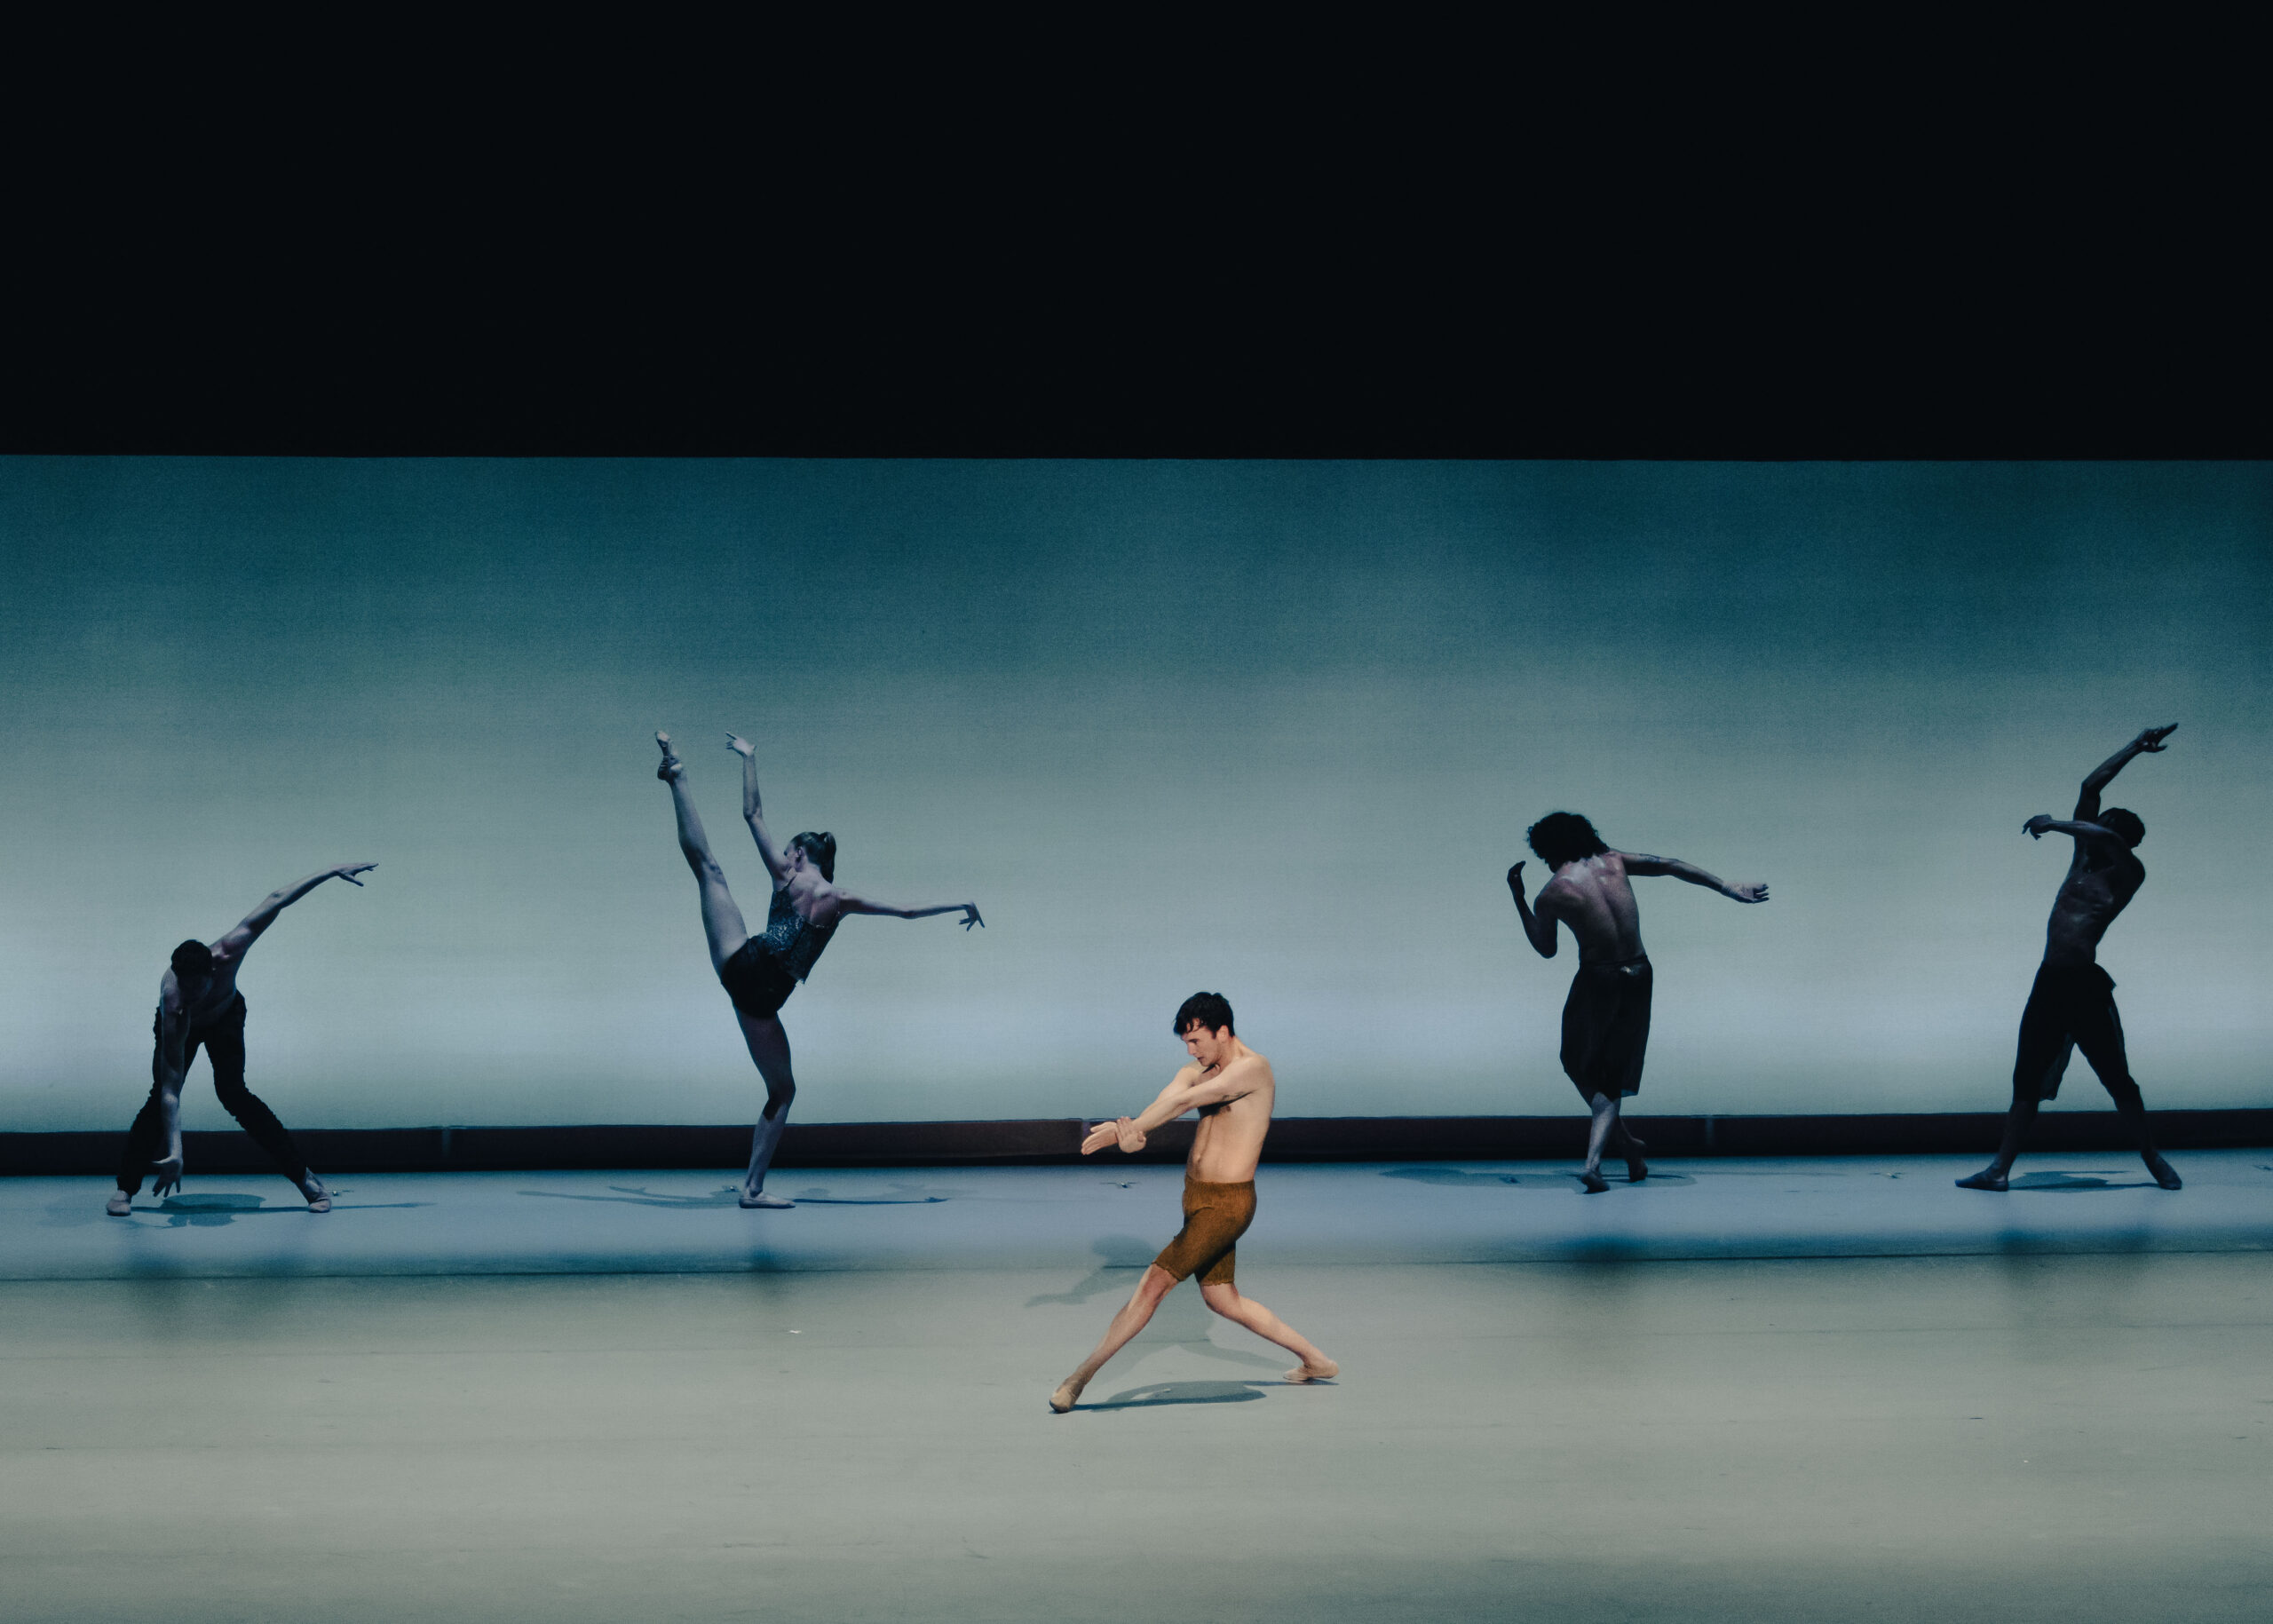 James Gowan and other LINES Ballet company artists